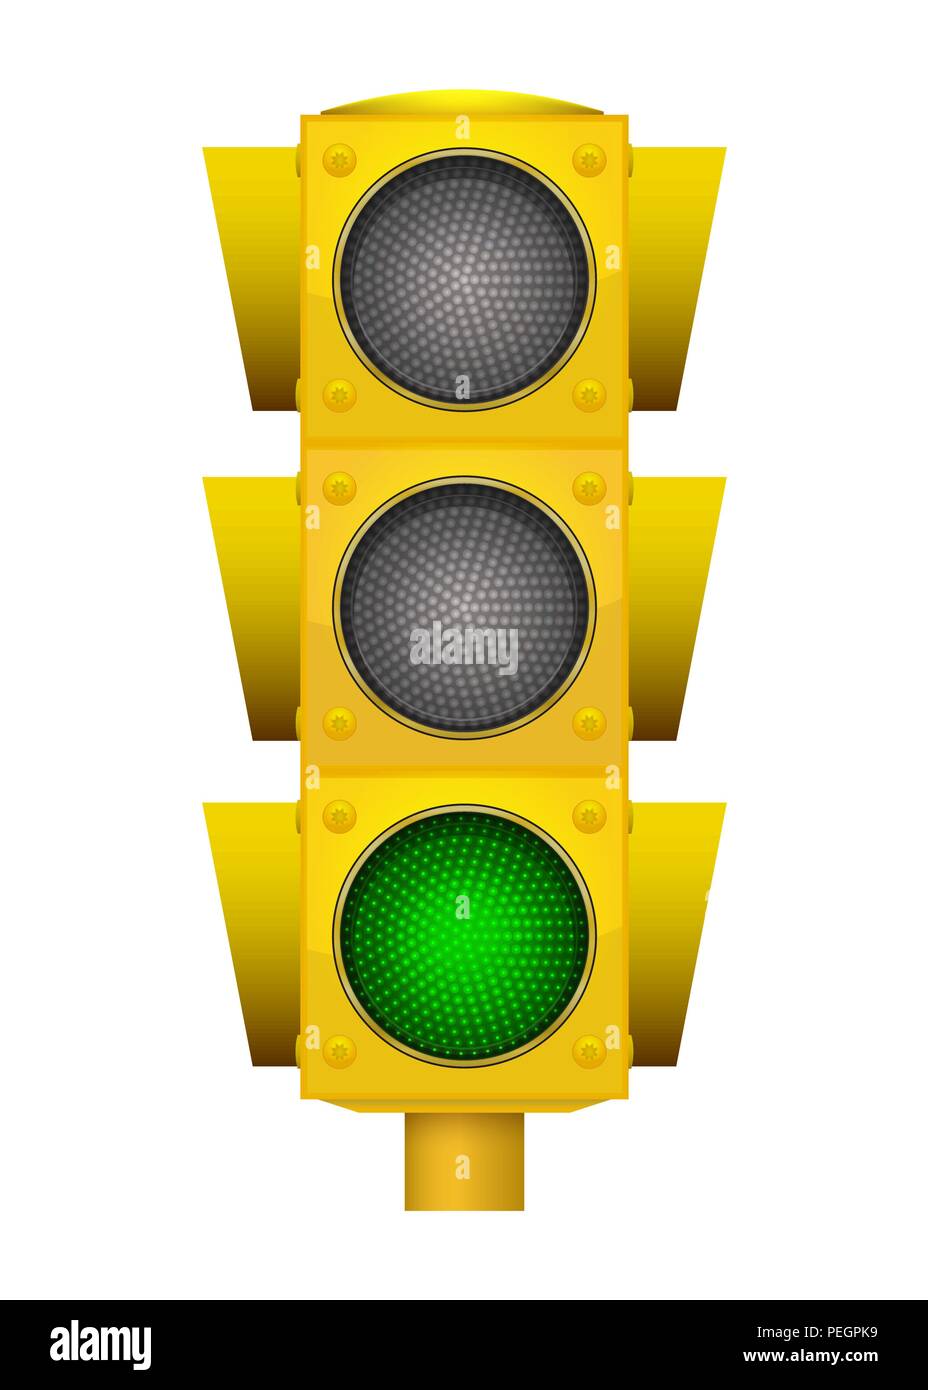 Realistic illustration of modern yellow led traffic light with switching on green light. Stock Vector